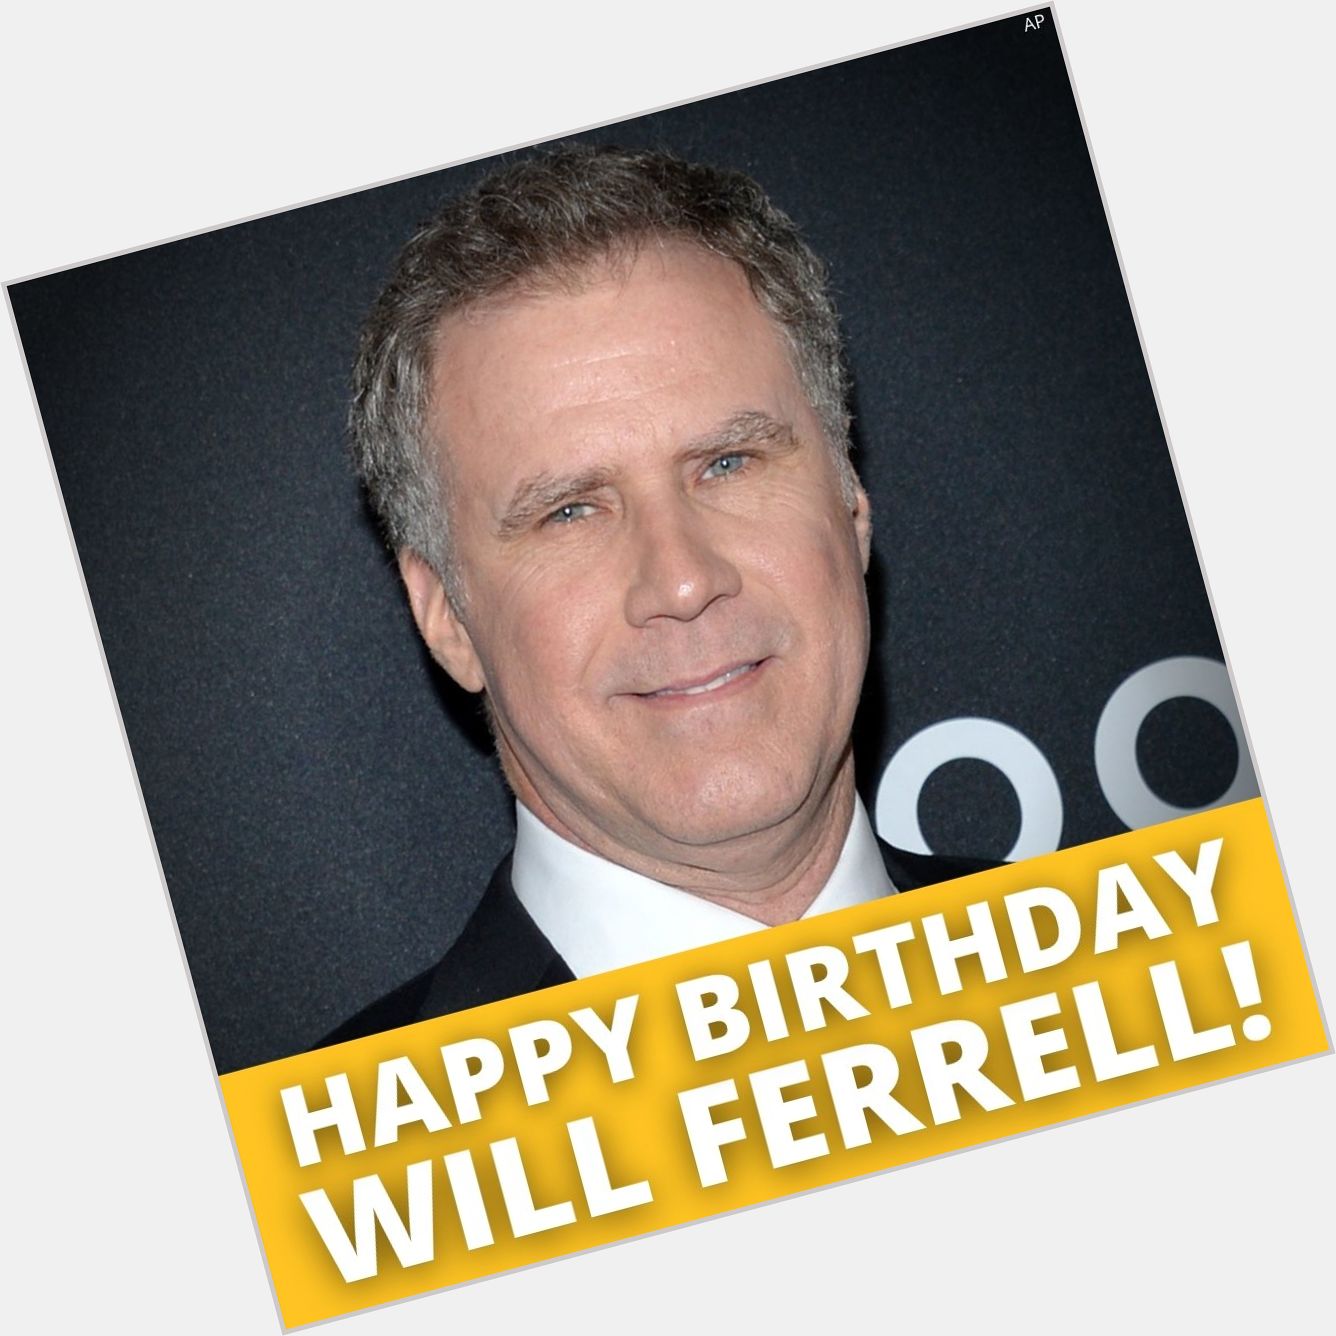 Happy 54th Birthday, Will Ferrell! What\s your favorite Will Ferrell movie? 